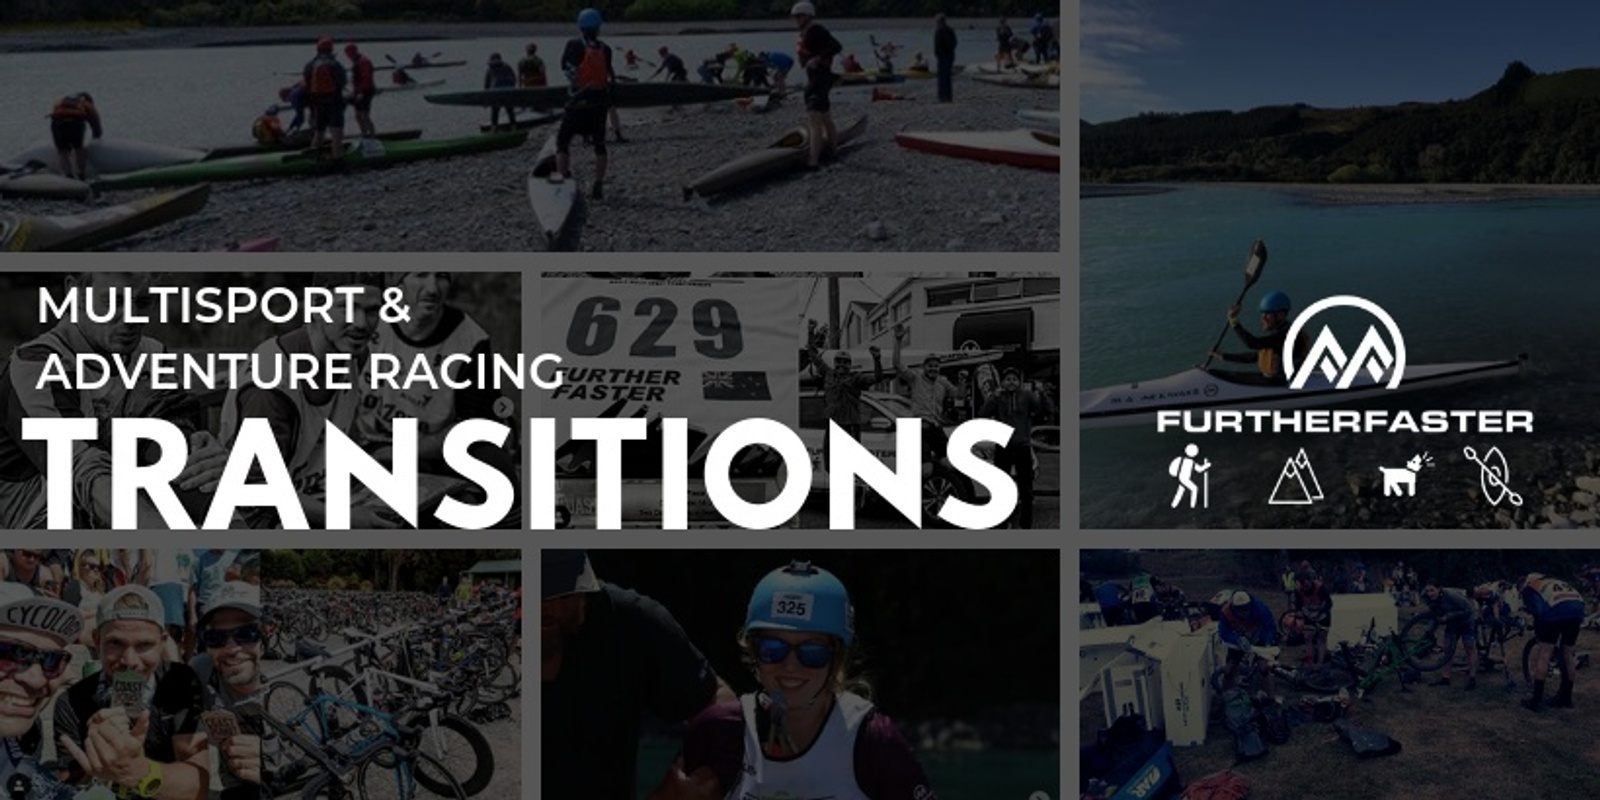 Banner image for Further Faster presents: Multi-sport & Adventure Racing Transitions Night